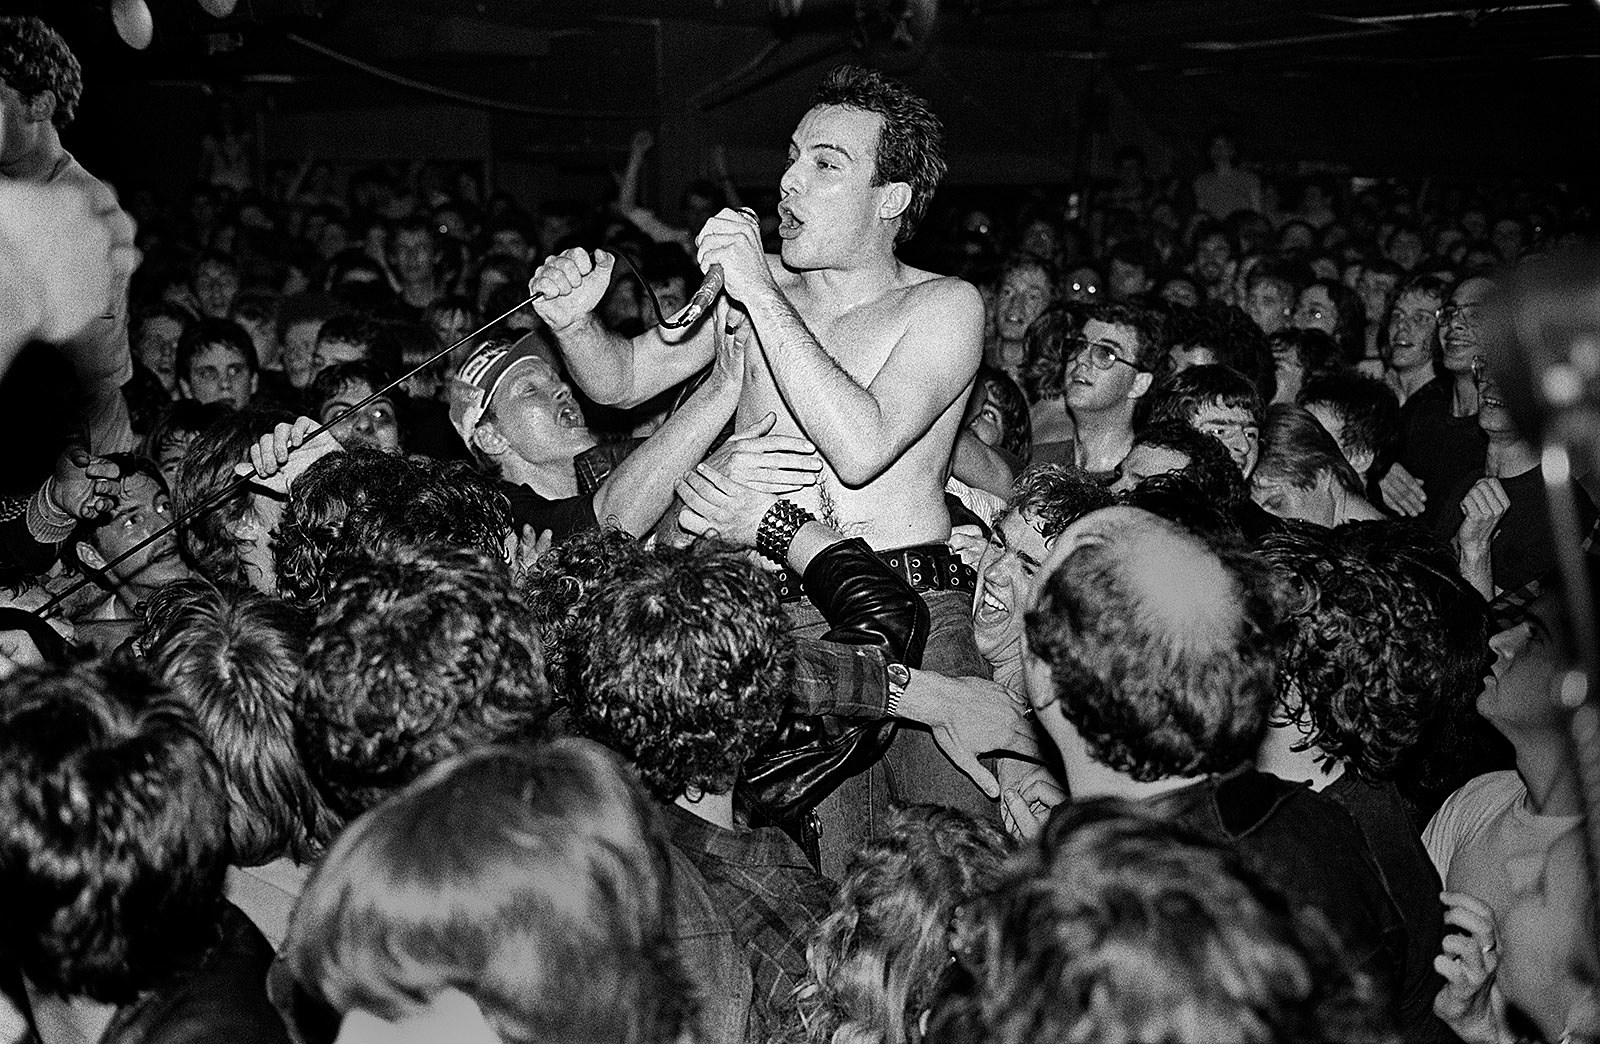 Pics: Dead Kennedys, The Cramps, The Clash &amp; more from &#39;Punk, Post Punk,  New Wave&#39; photo book